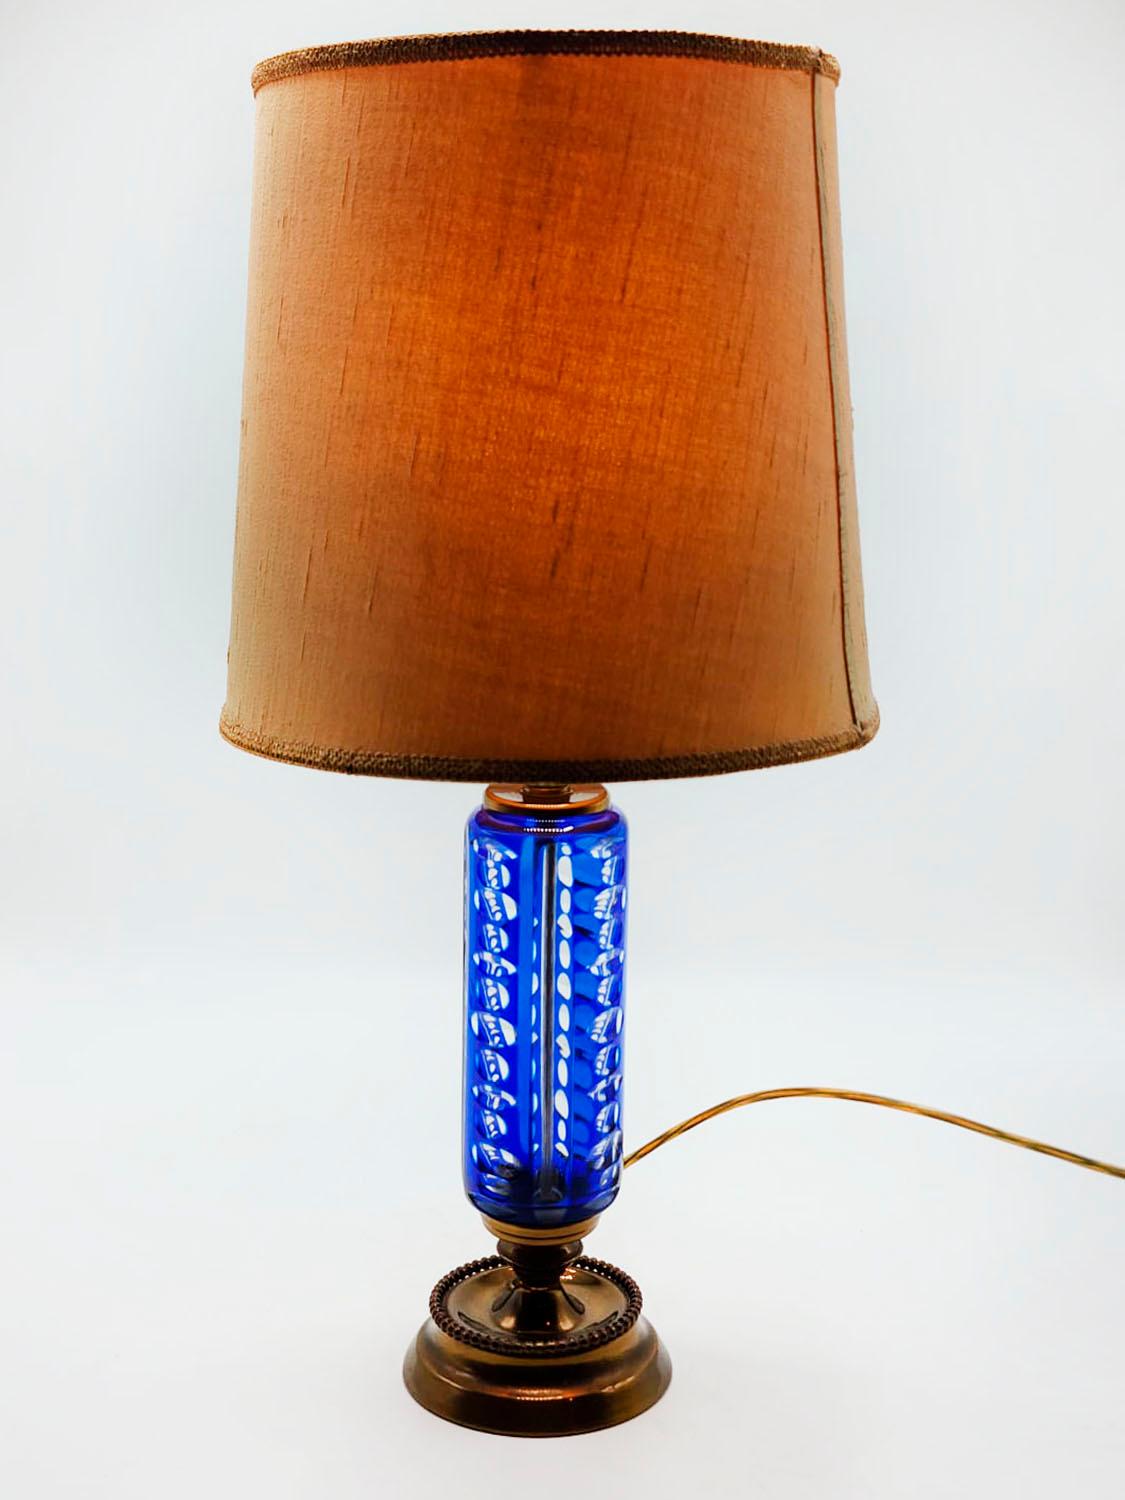 20th century blue and bronze cut glass table lamp

Distinctive art deco table lamp made of cut glass with blue color and bronze base, from the mid-20th century, perfect for decorating in a classic maximalist style

Measures:
Height: 28.5